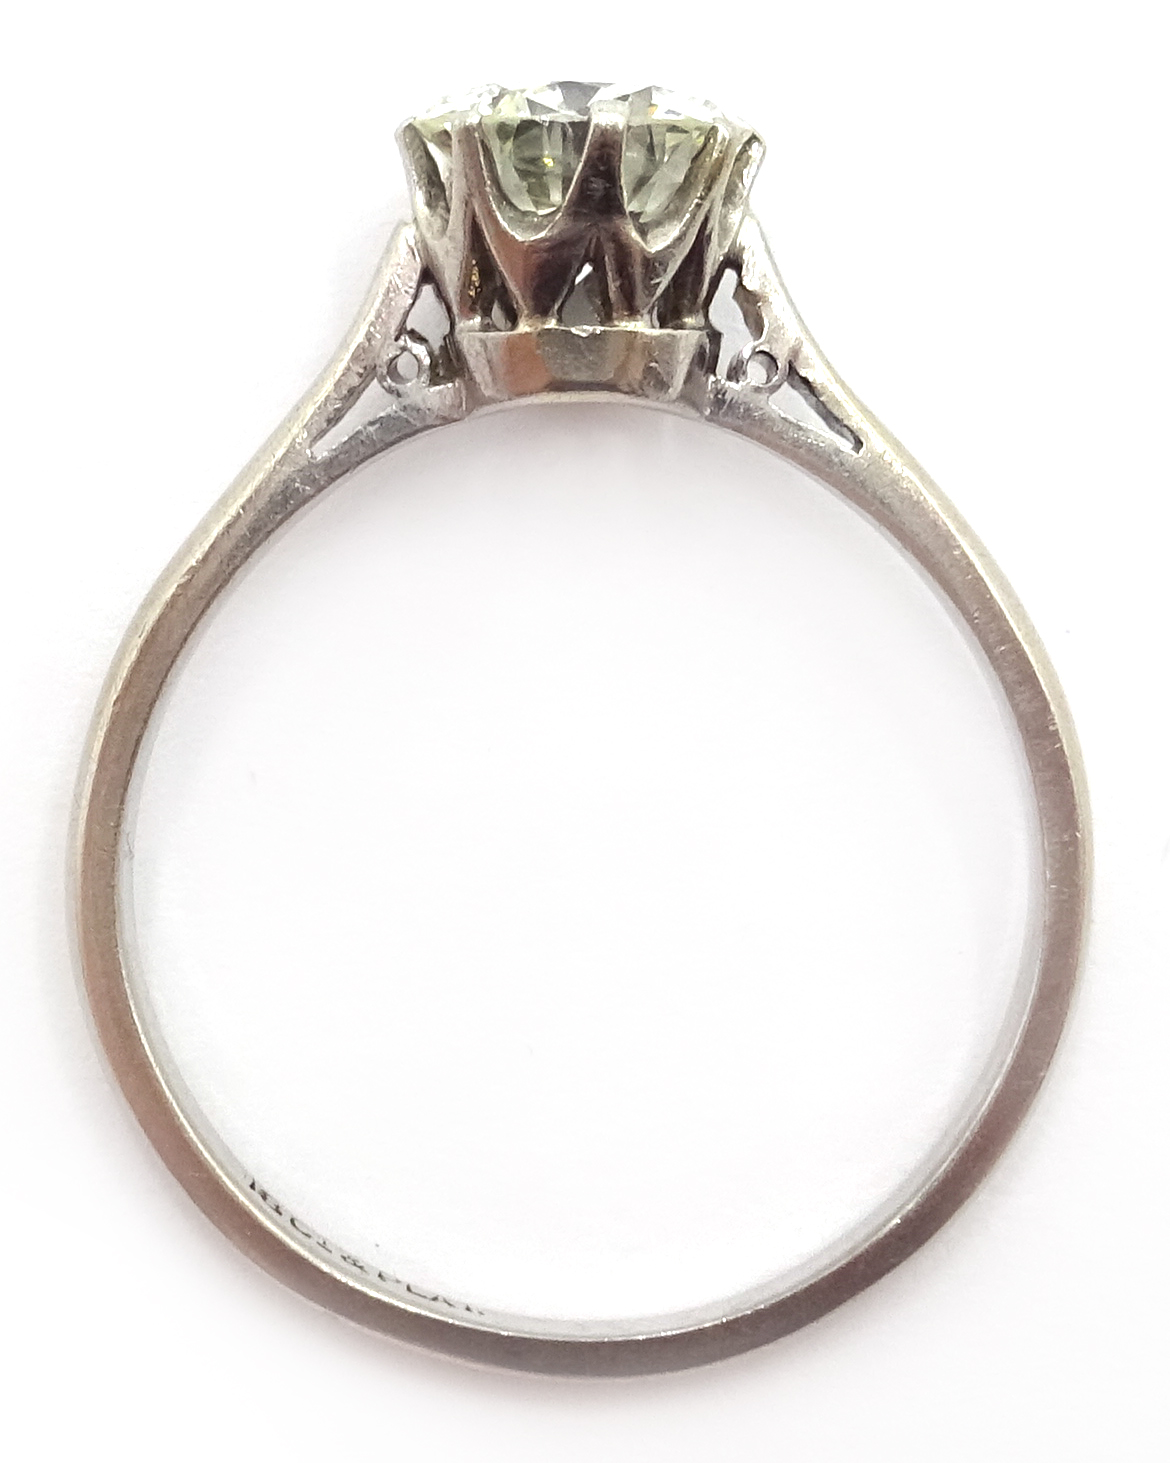 White gold brilliant cut diamond solitaire ring, stamped 18ct&Plat, diamond approx 1. - Image 5 of 5